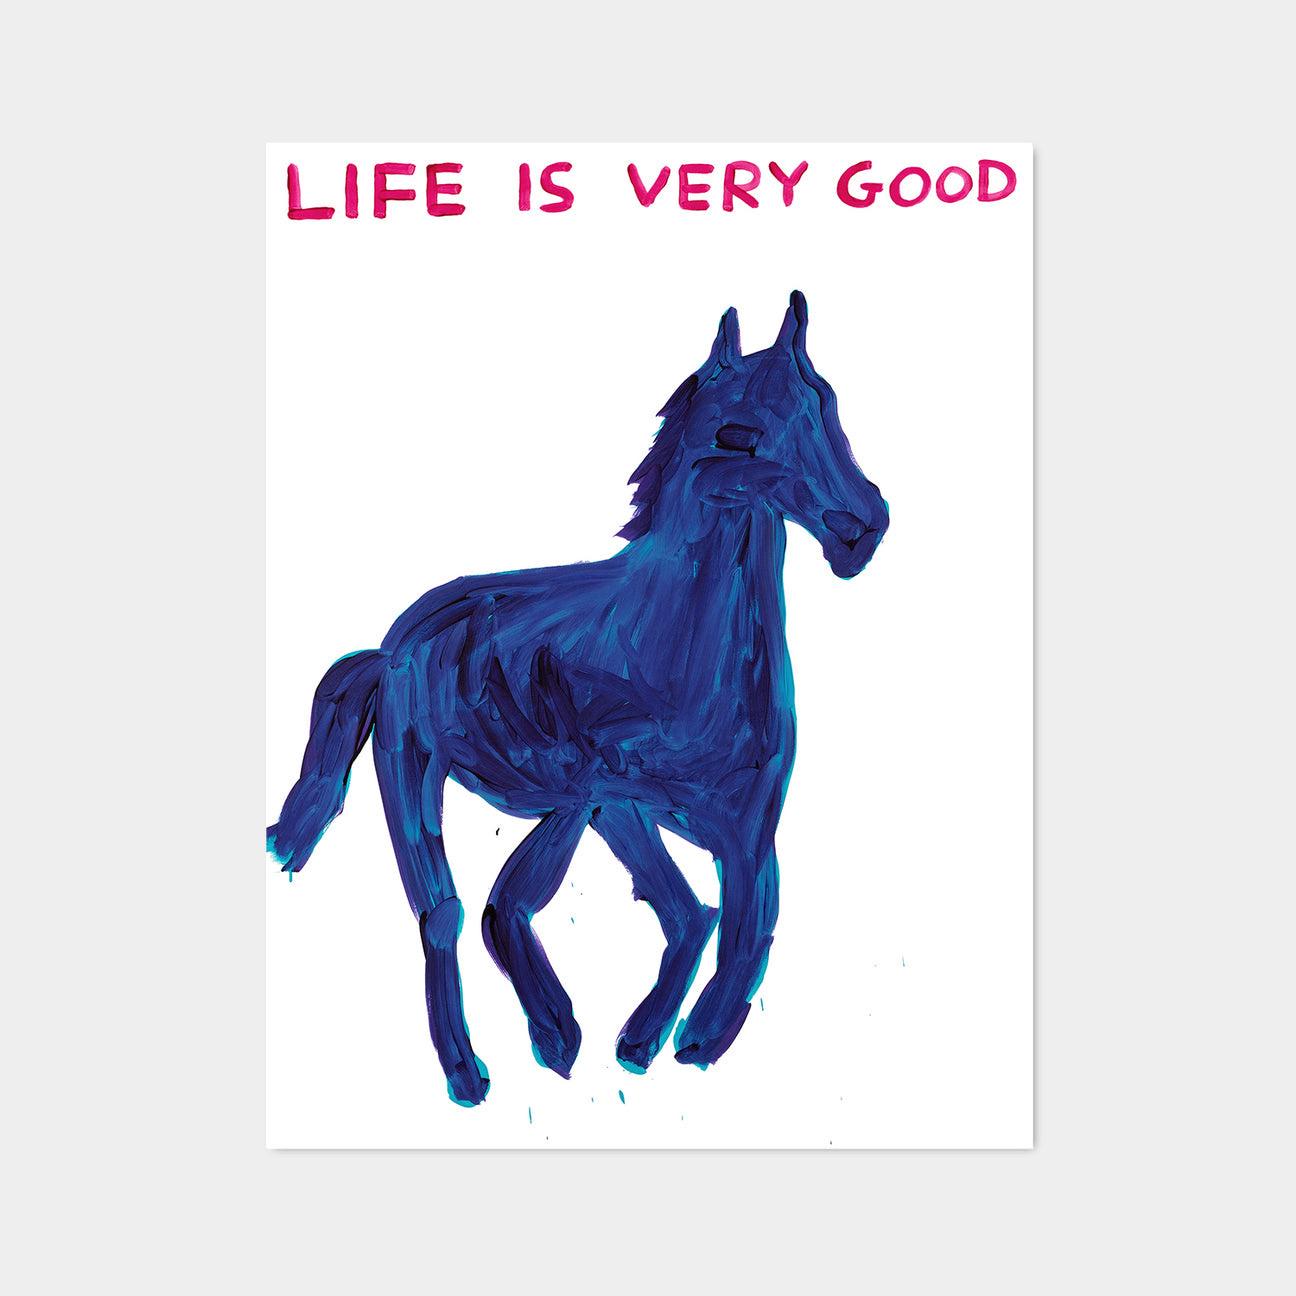 David Shrigley, Life Is Very Good, 2016

Off-set lithograph
Open edition, unframed 
60 x 80 cm (23.62 x 31.5 inches) 
Printed on 200g Munken Lynx paper by Narayana Press in Denmark 

David Shrigley’s work is humorous, interspersed with his witty